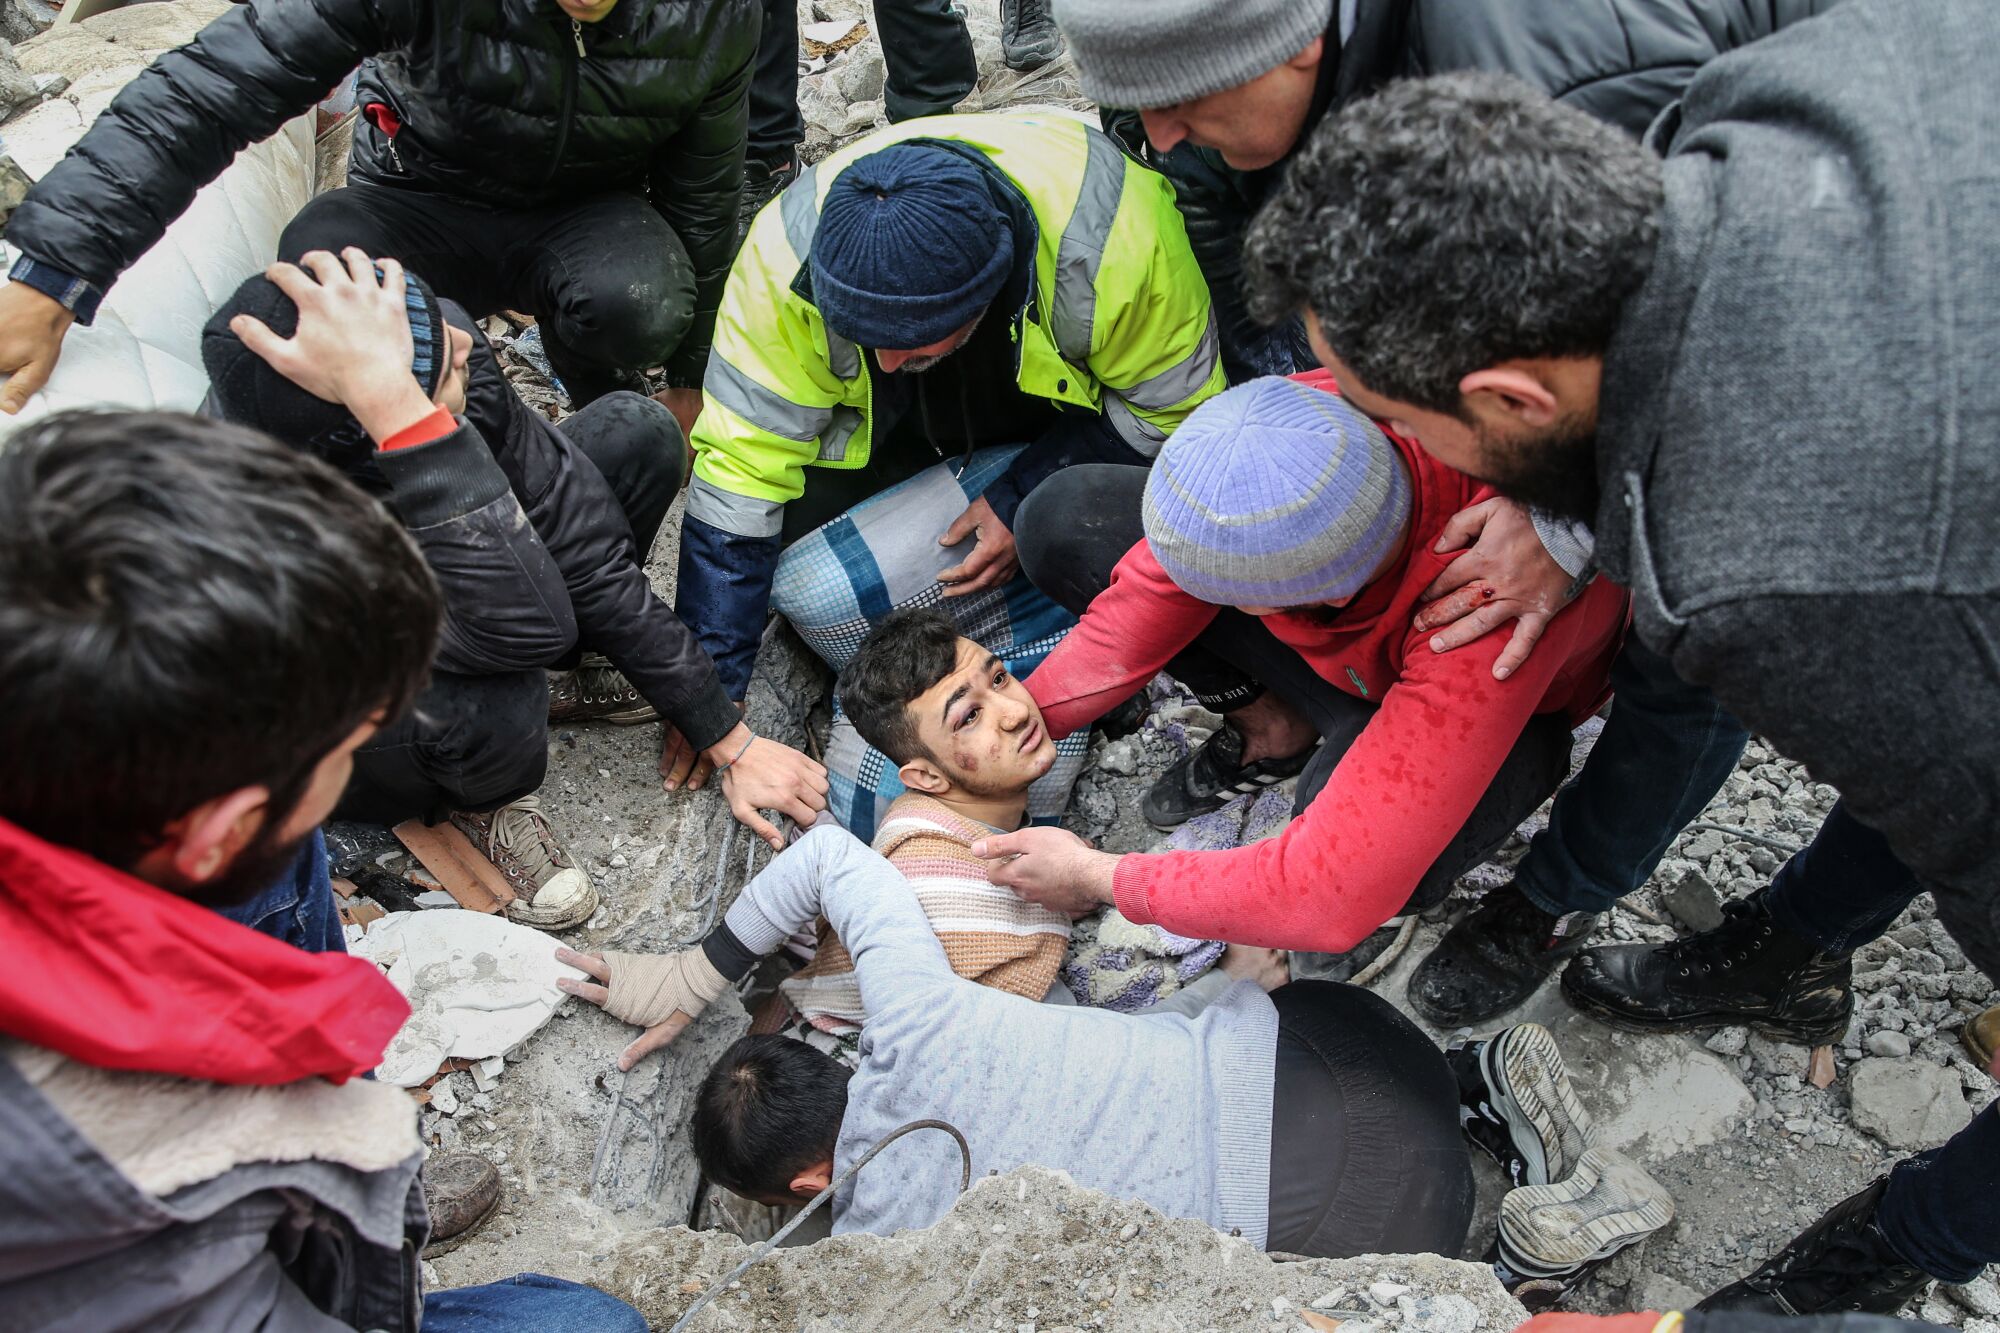 In a top-down-view a young man emerges, head and shoulders, from under rubble, being pulled out by a group of men.